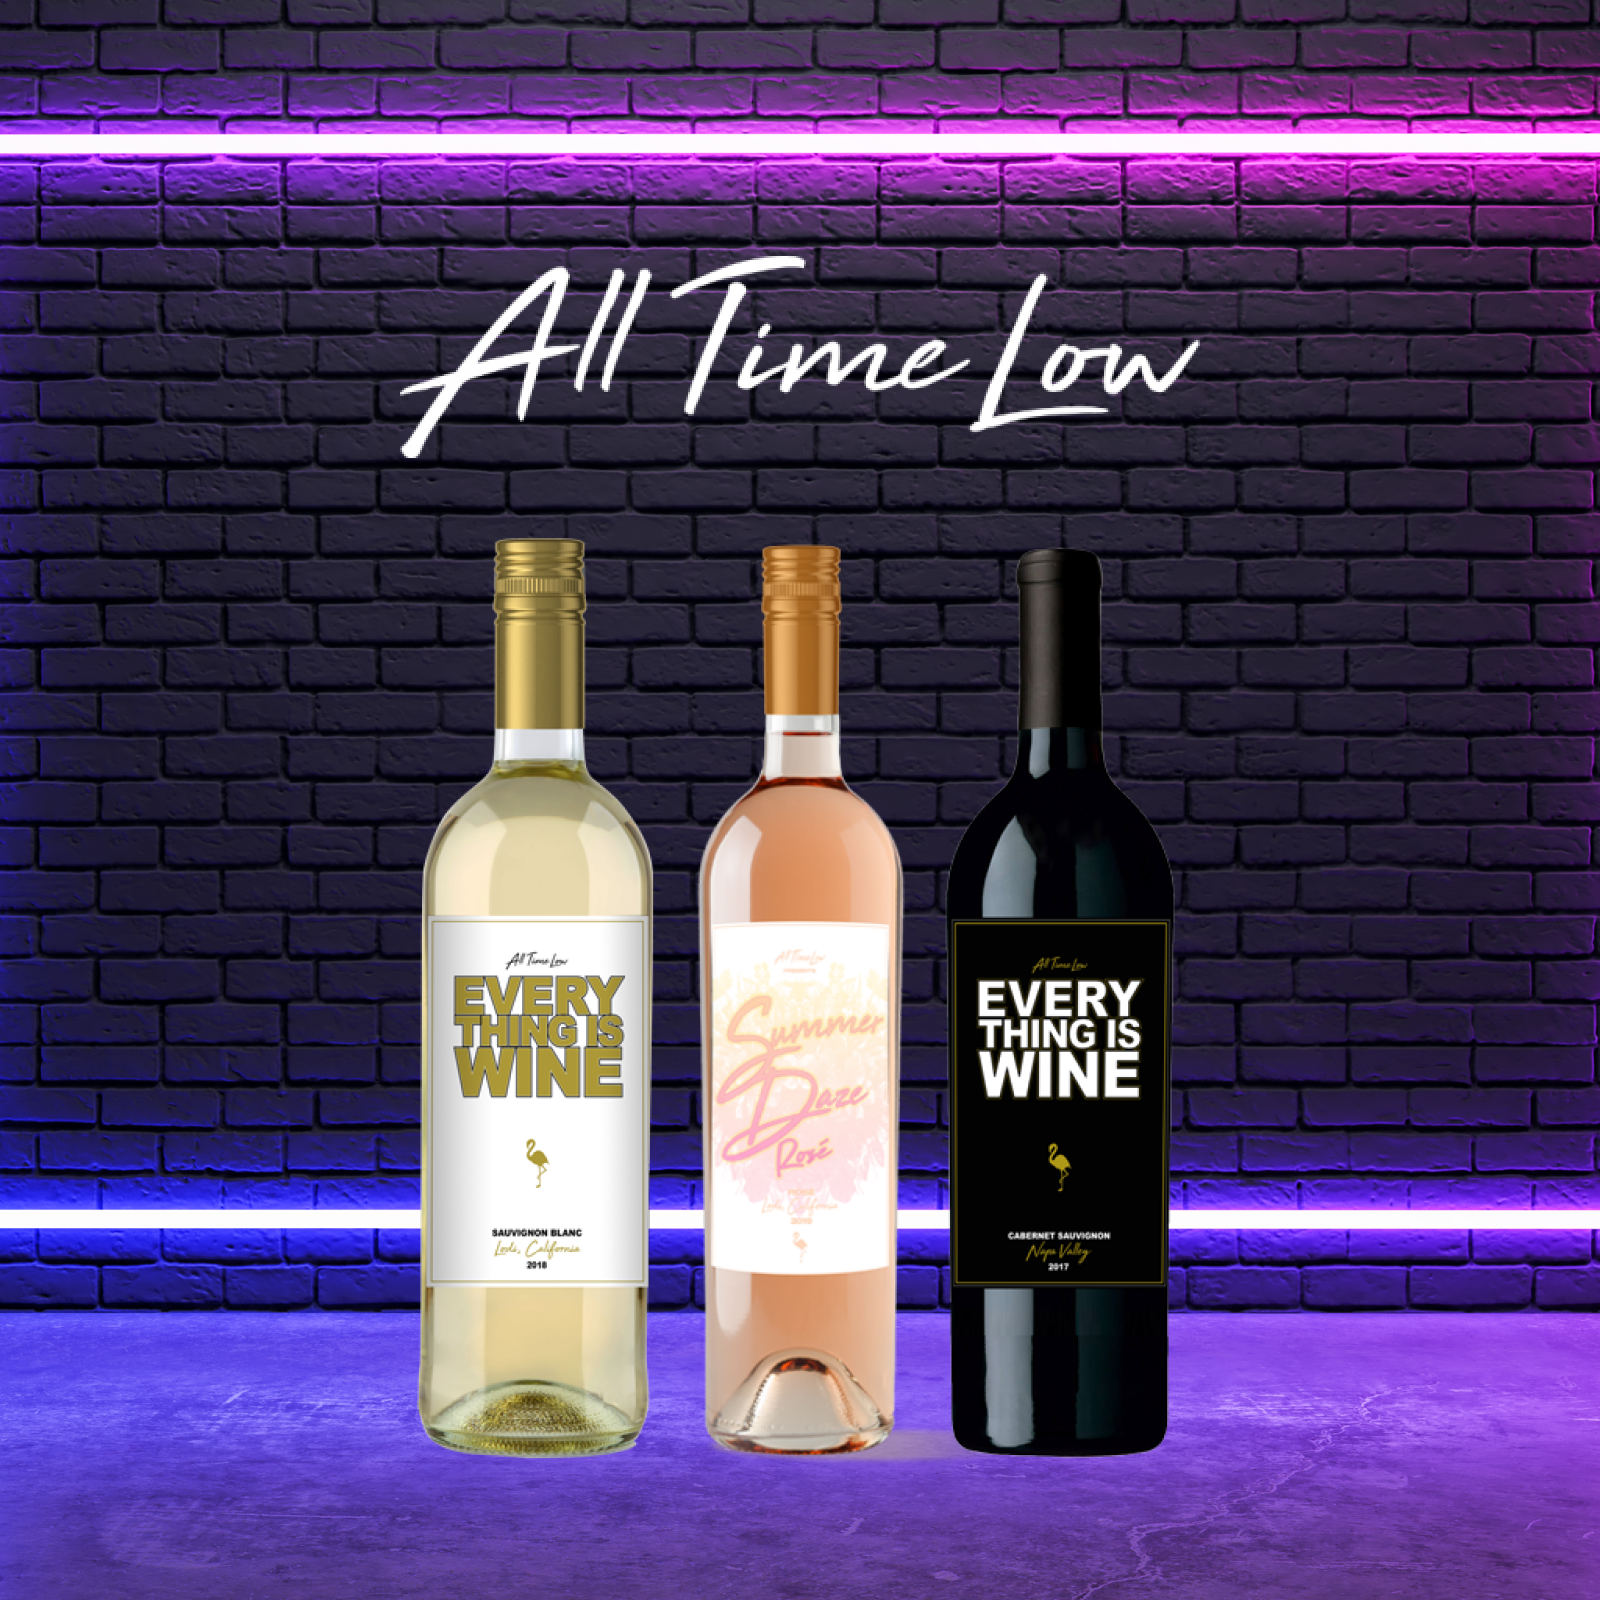 3 All Time Low branded wine bottles